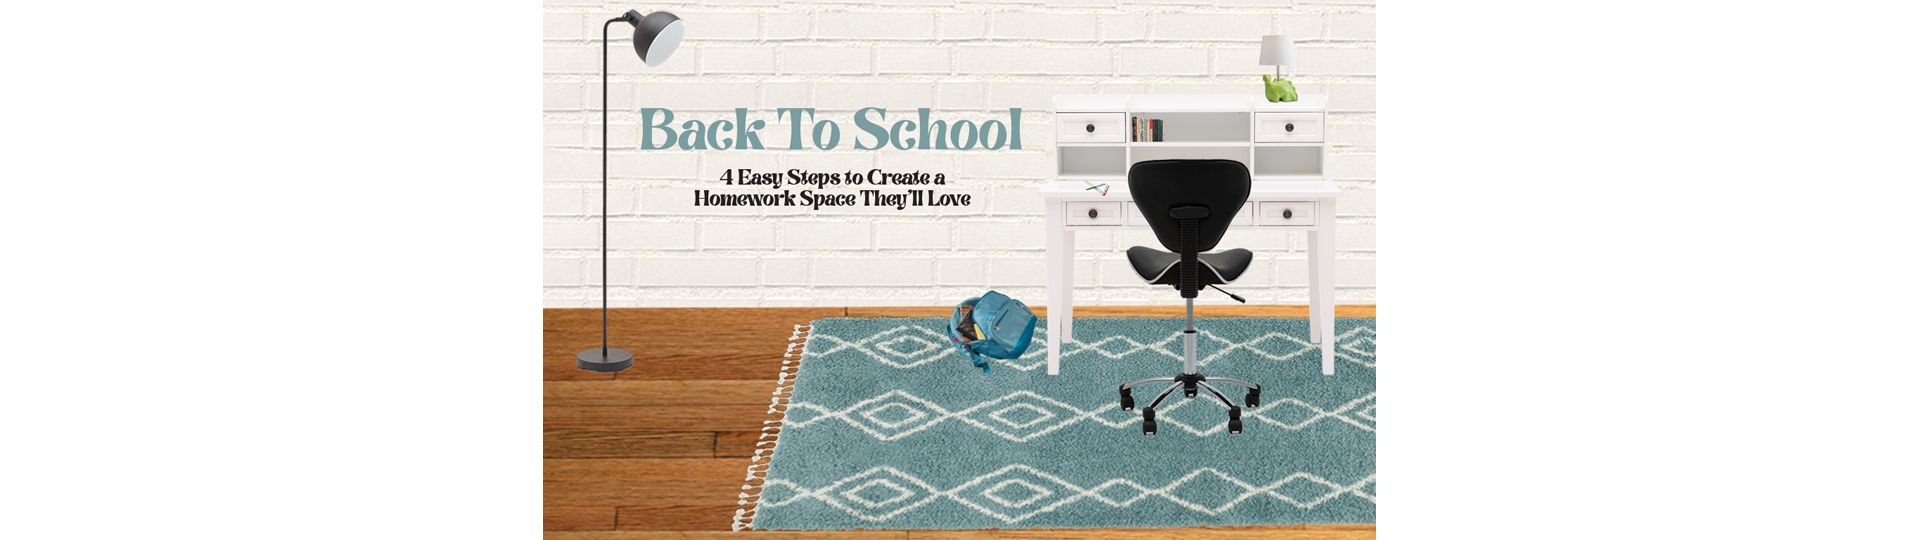 Back to School. 4 Easy Steps to Create a Homework Space They'll love.